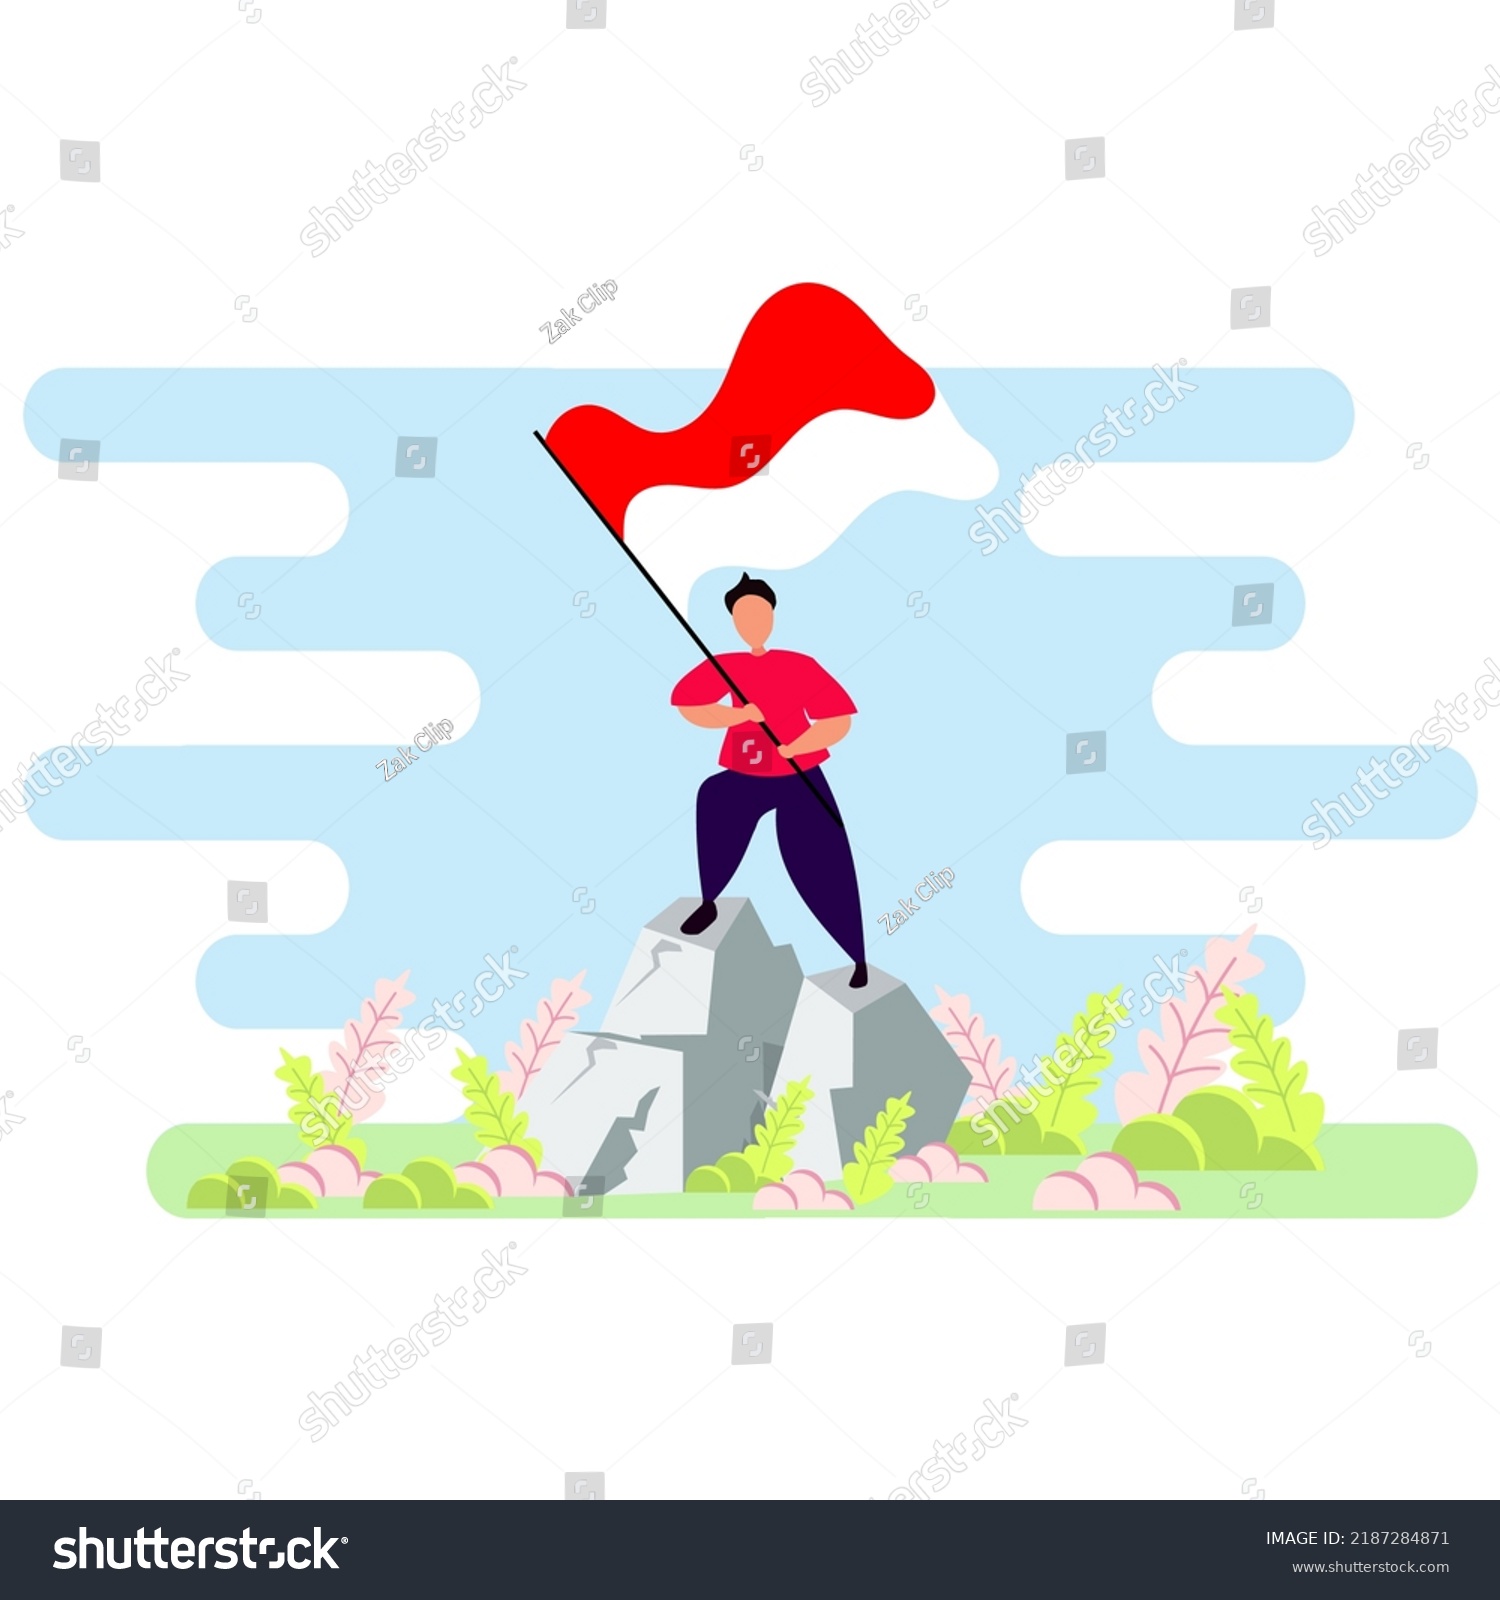 People Celebrate Indonesias Independence Day By Stock Vector Royalty Free 2187284871 3124